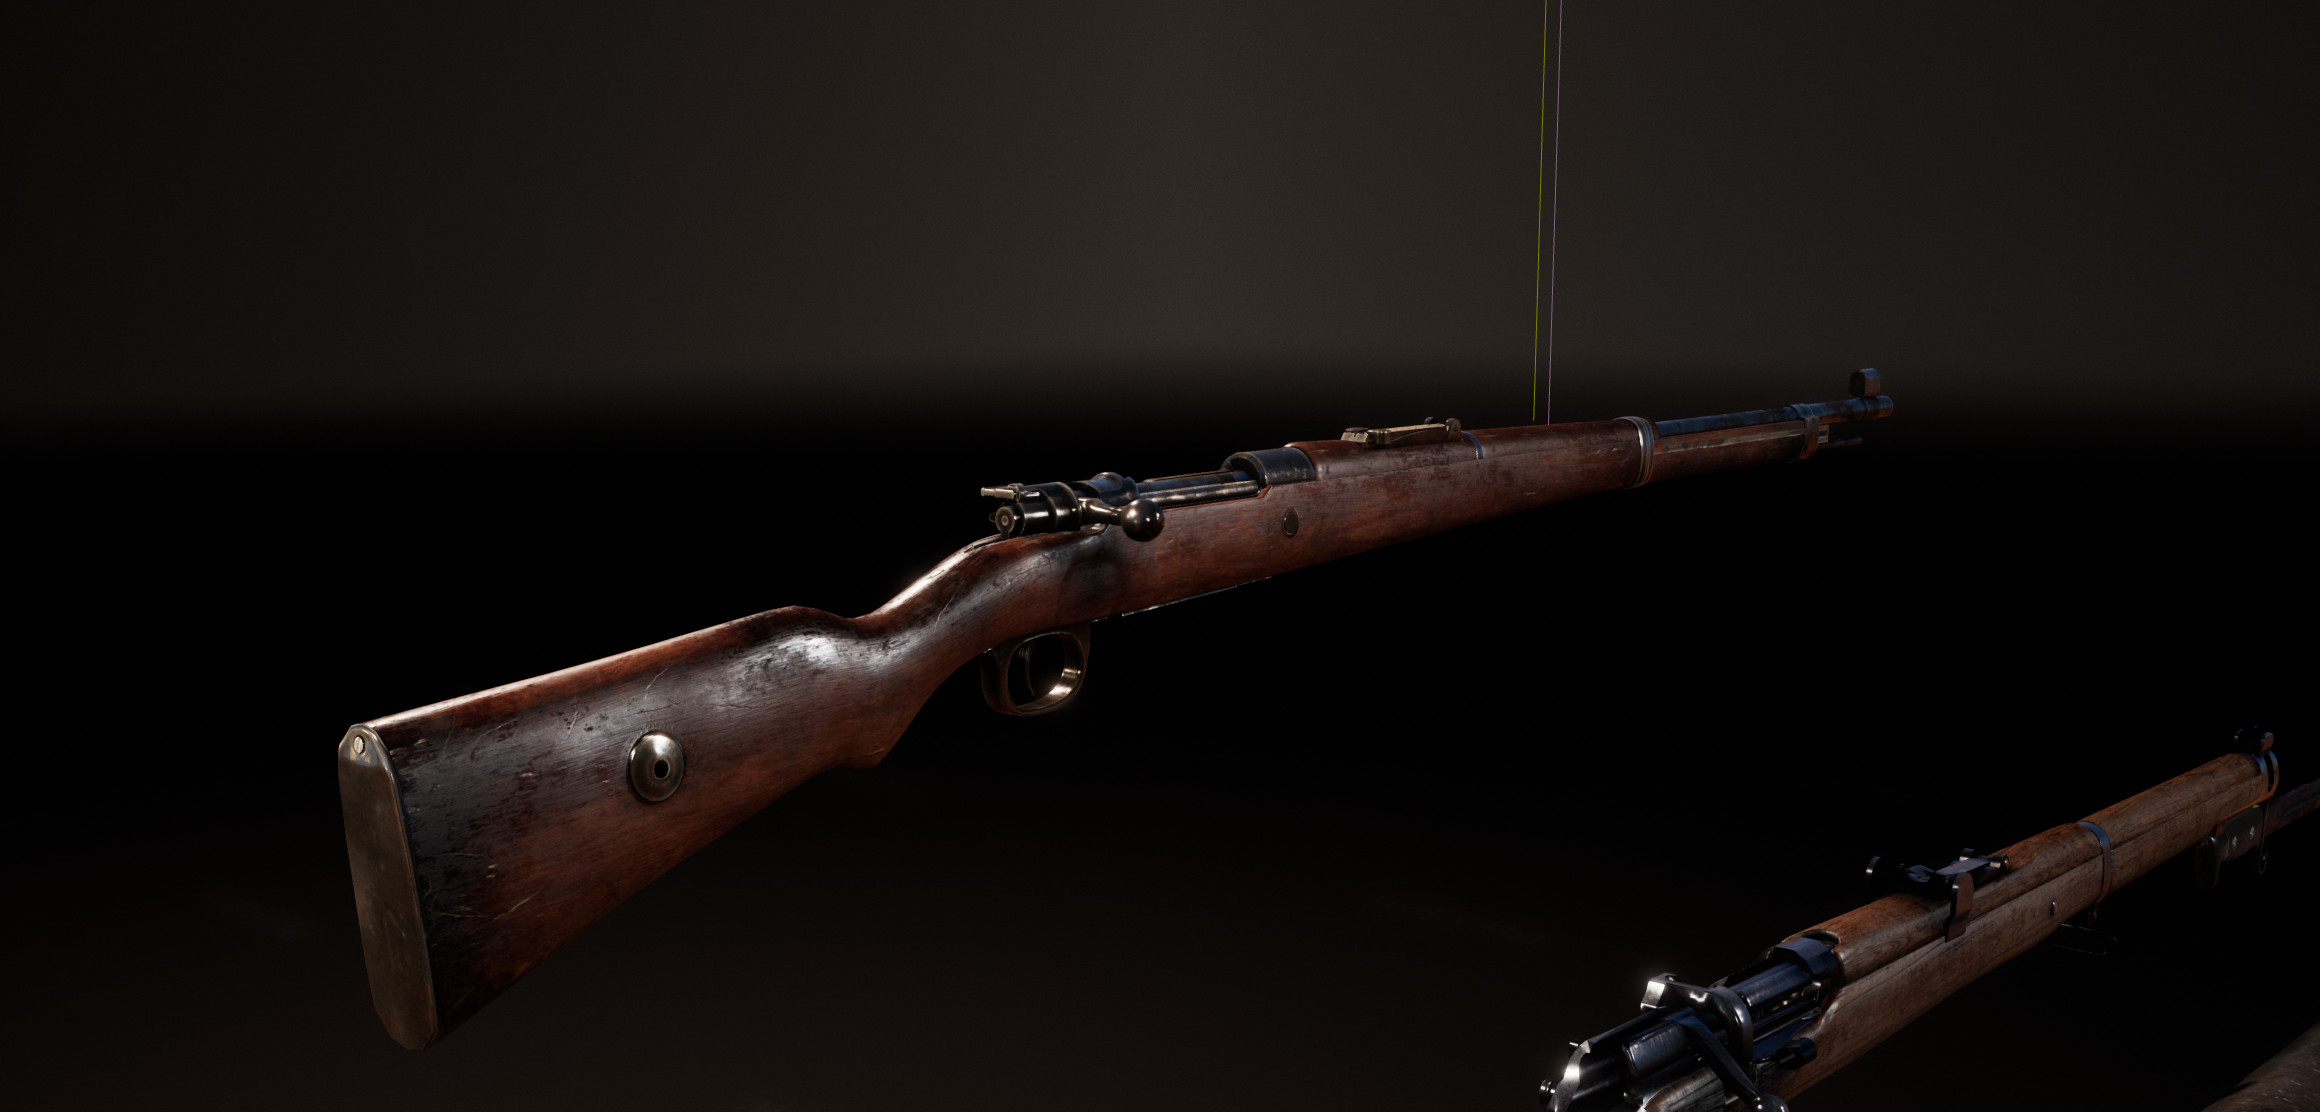 Mauser Rifle in UE4 with custom shader